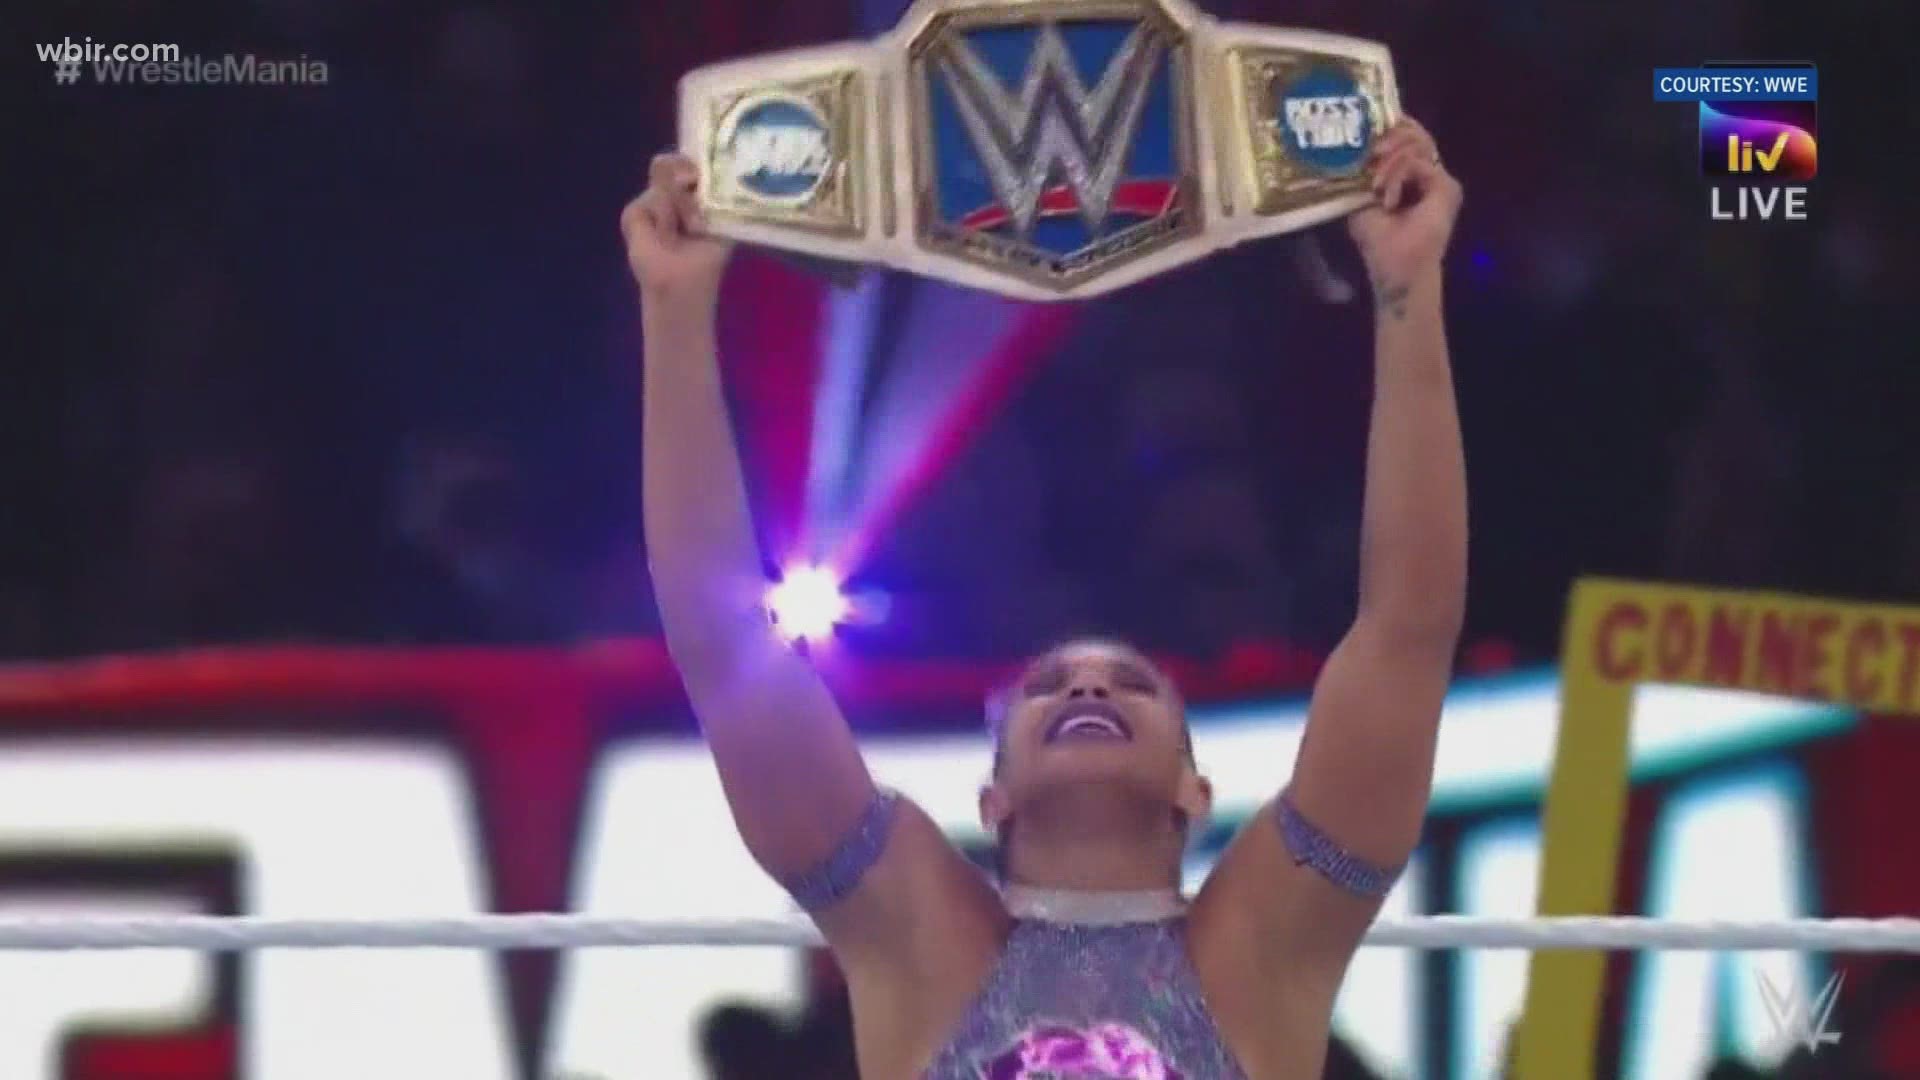 Knoxville has a new champion! Bianca Belair wins WWE Women's Champion.